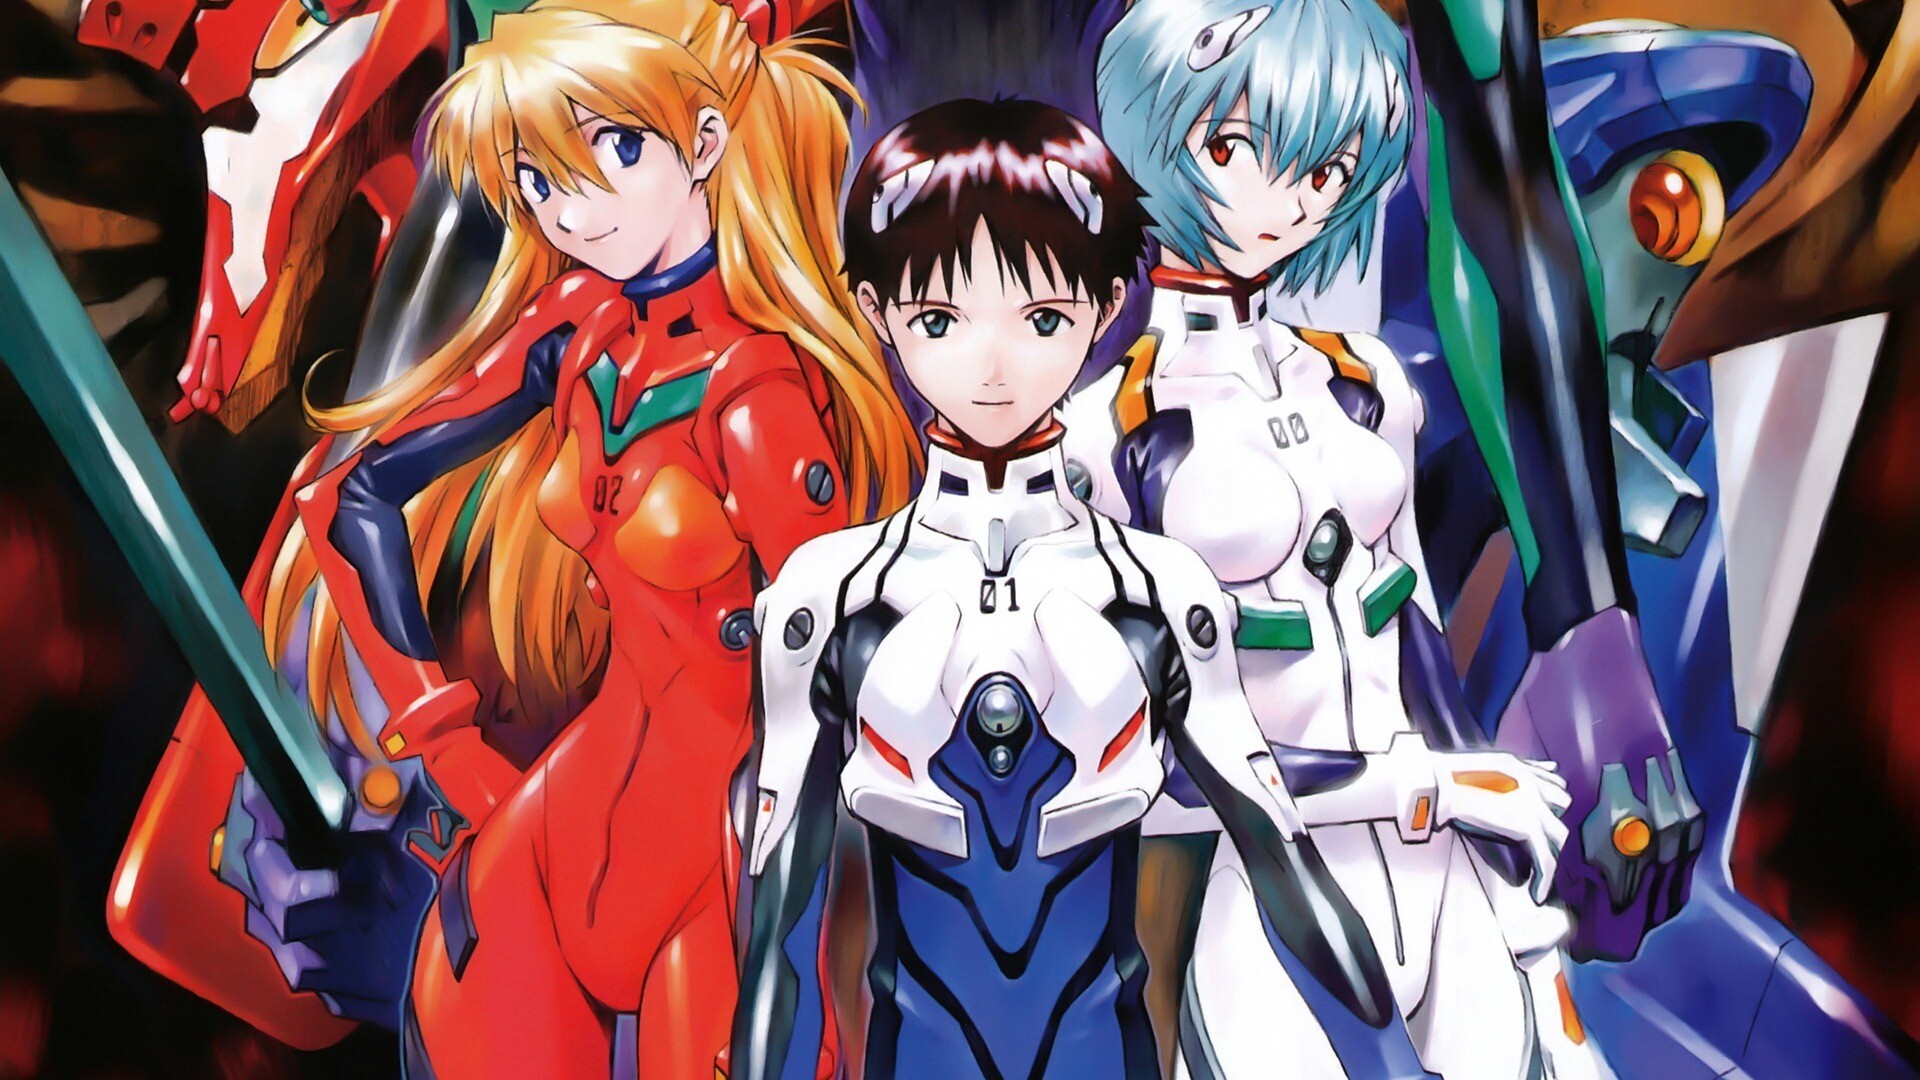 Evangelion: 3.0+1.0 Thrice Upon a Time: Asuka Langley Sohryu, Rei Ayanami, Unit-00. 1920x1080 Full HD Background.